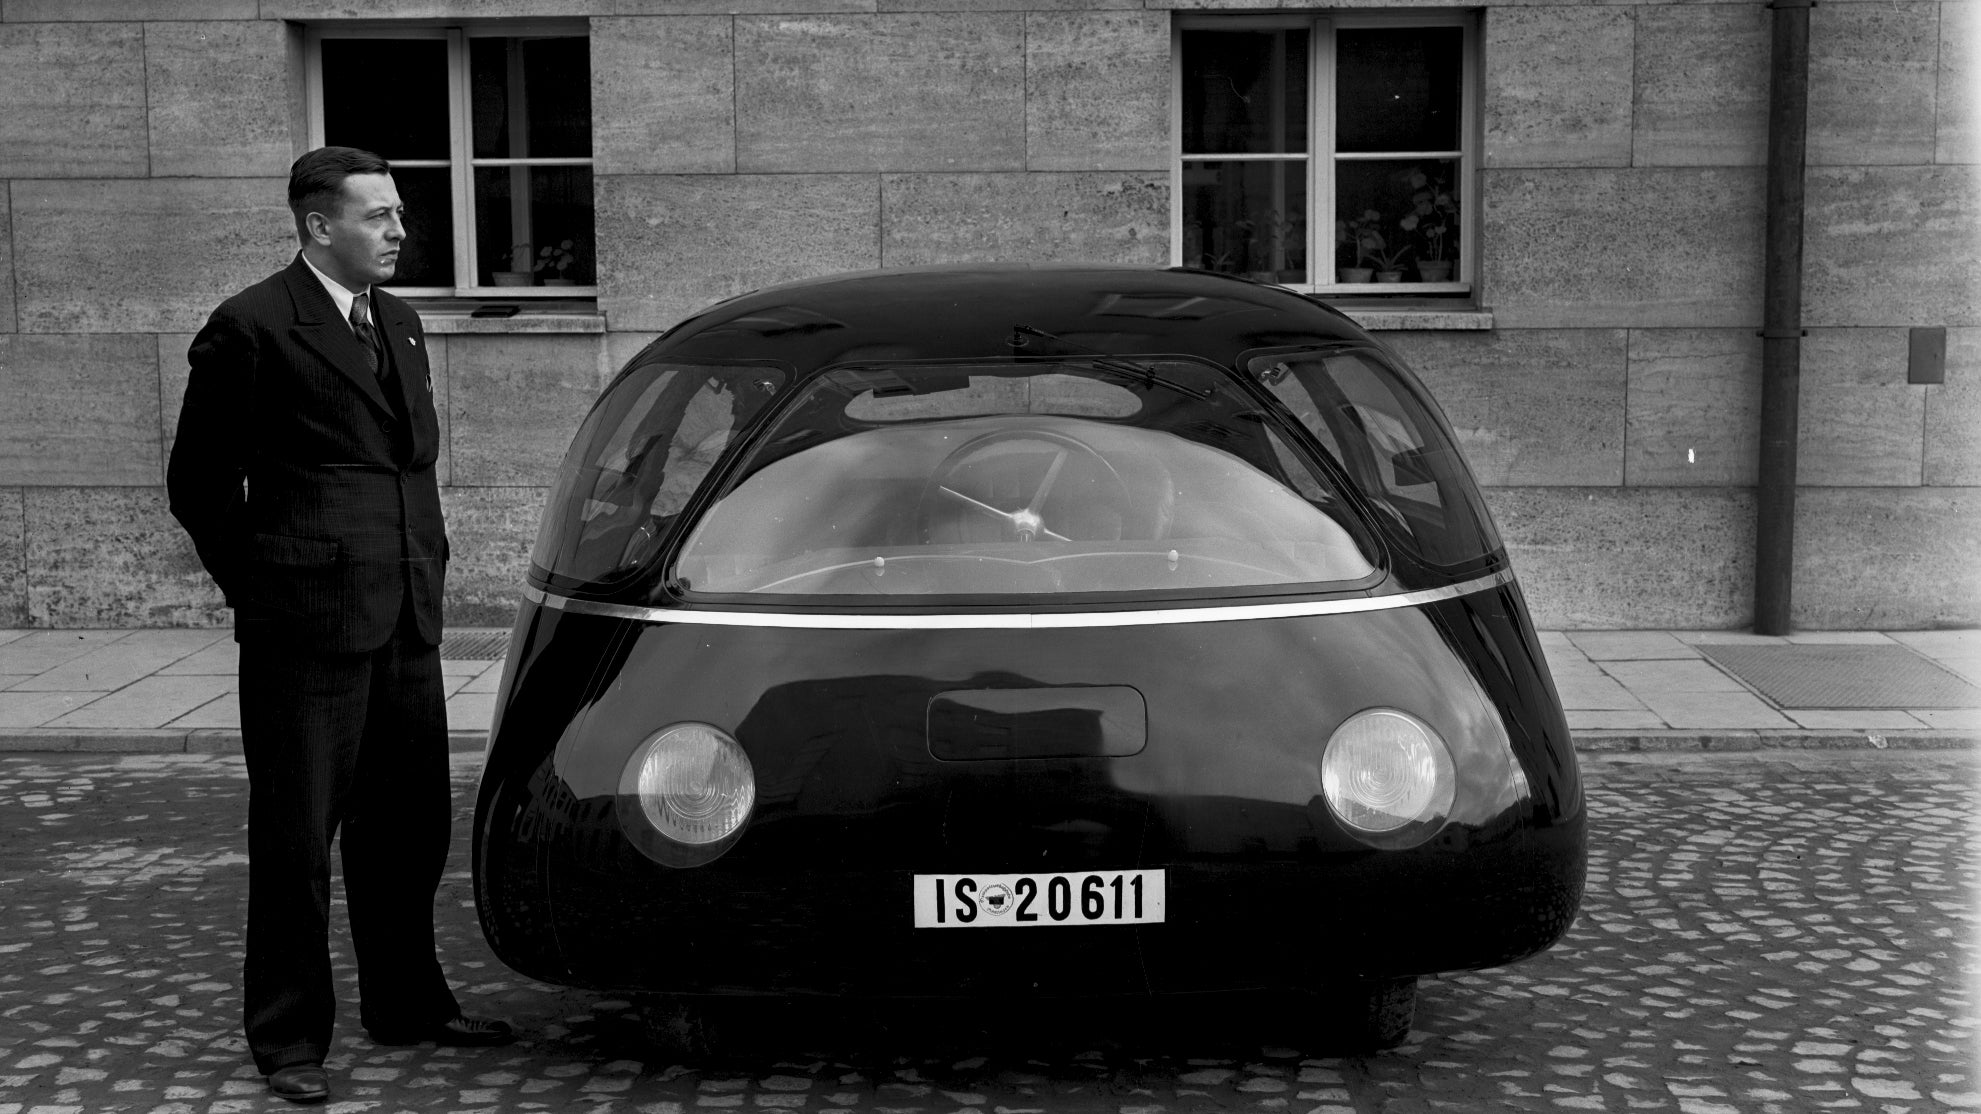 This 1930s Prototype Was More Aerodynamic Than Almost Any Modern Car